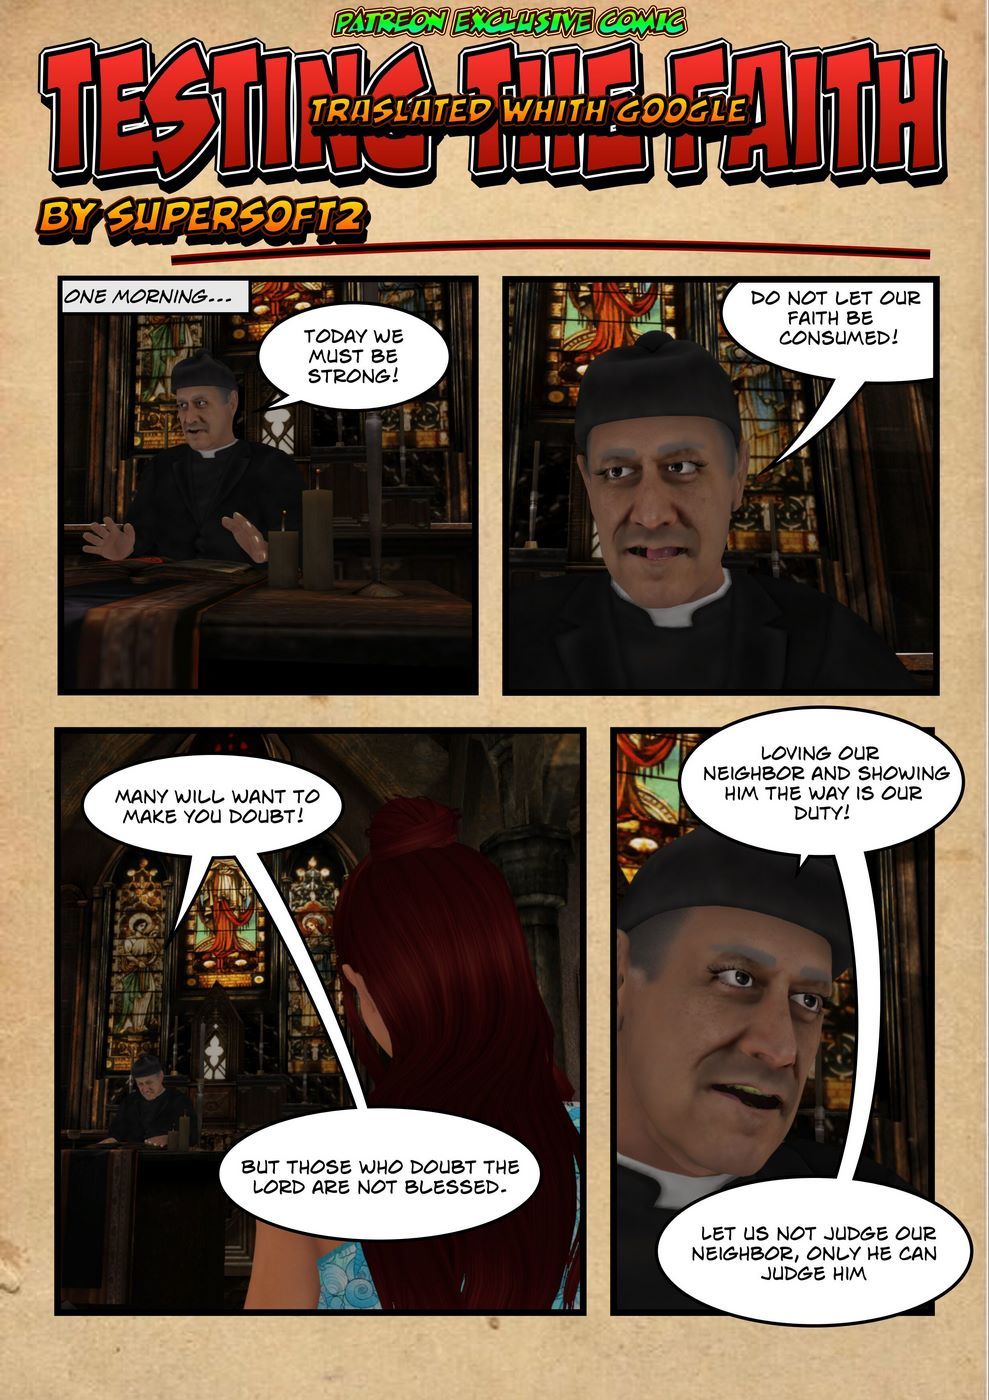 Testing The Faith - Supersoft2 page 1